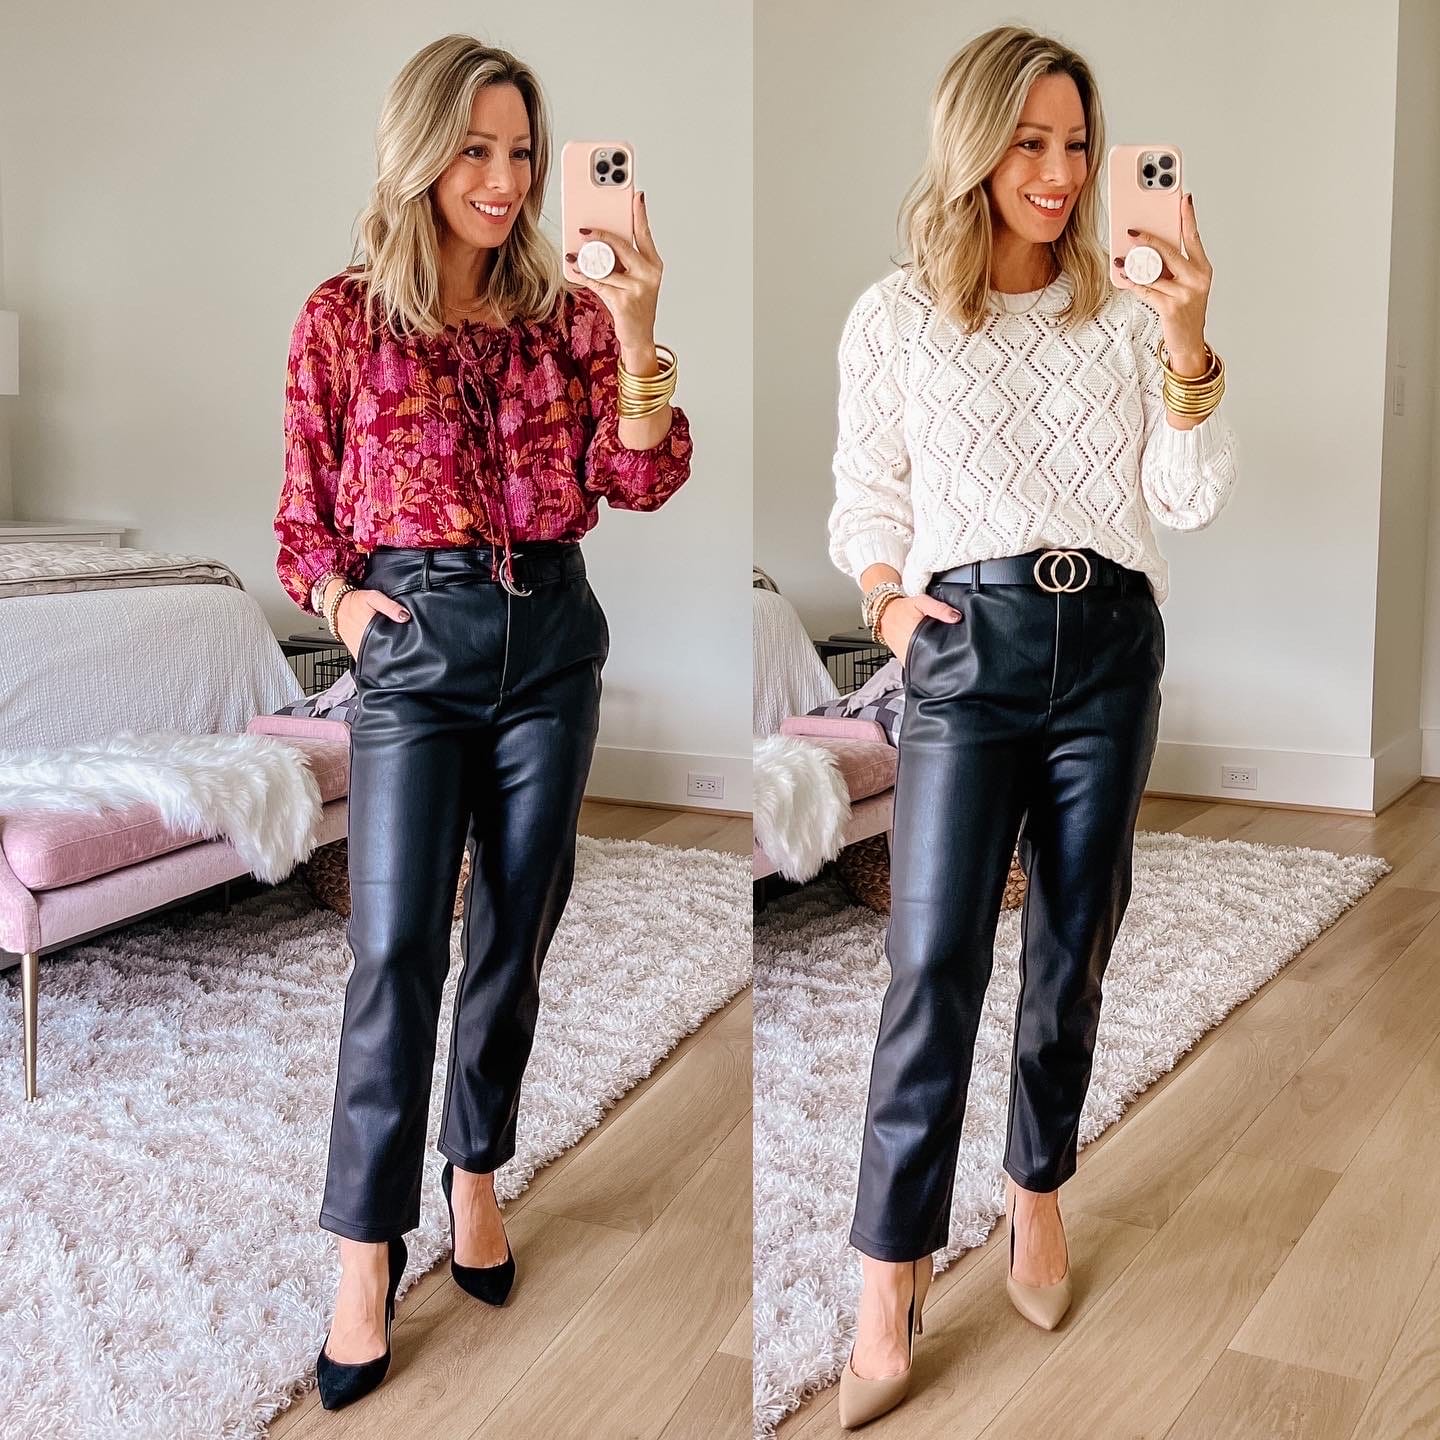 Red Blouse, Swater, Faux Leather pants, Heels